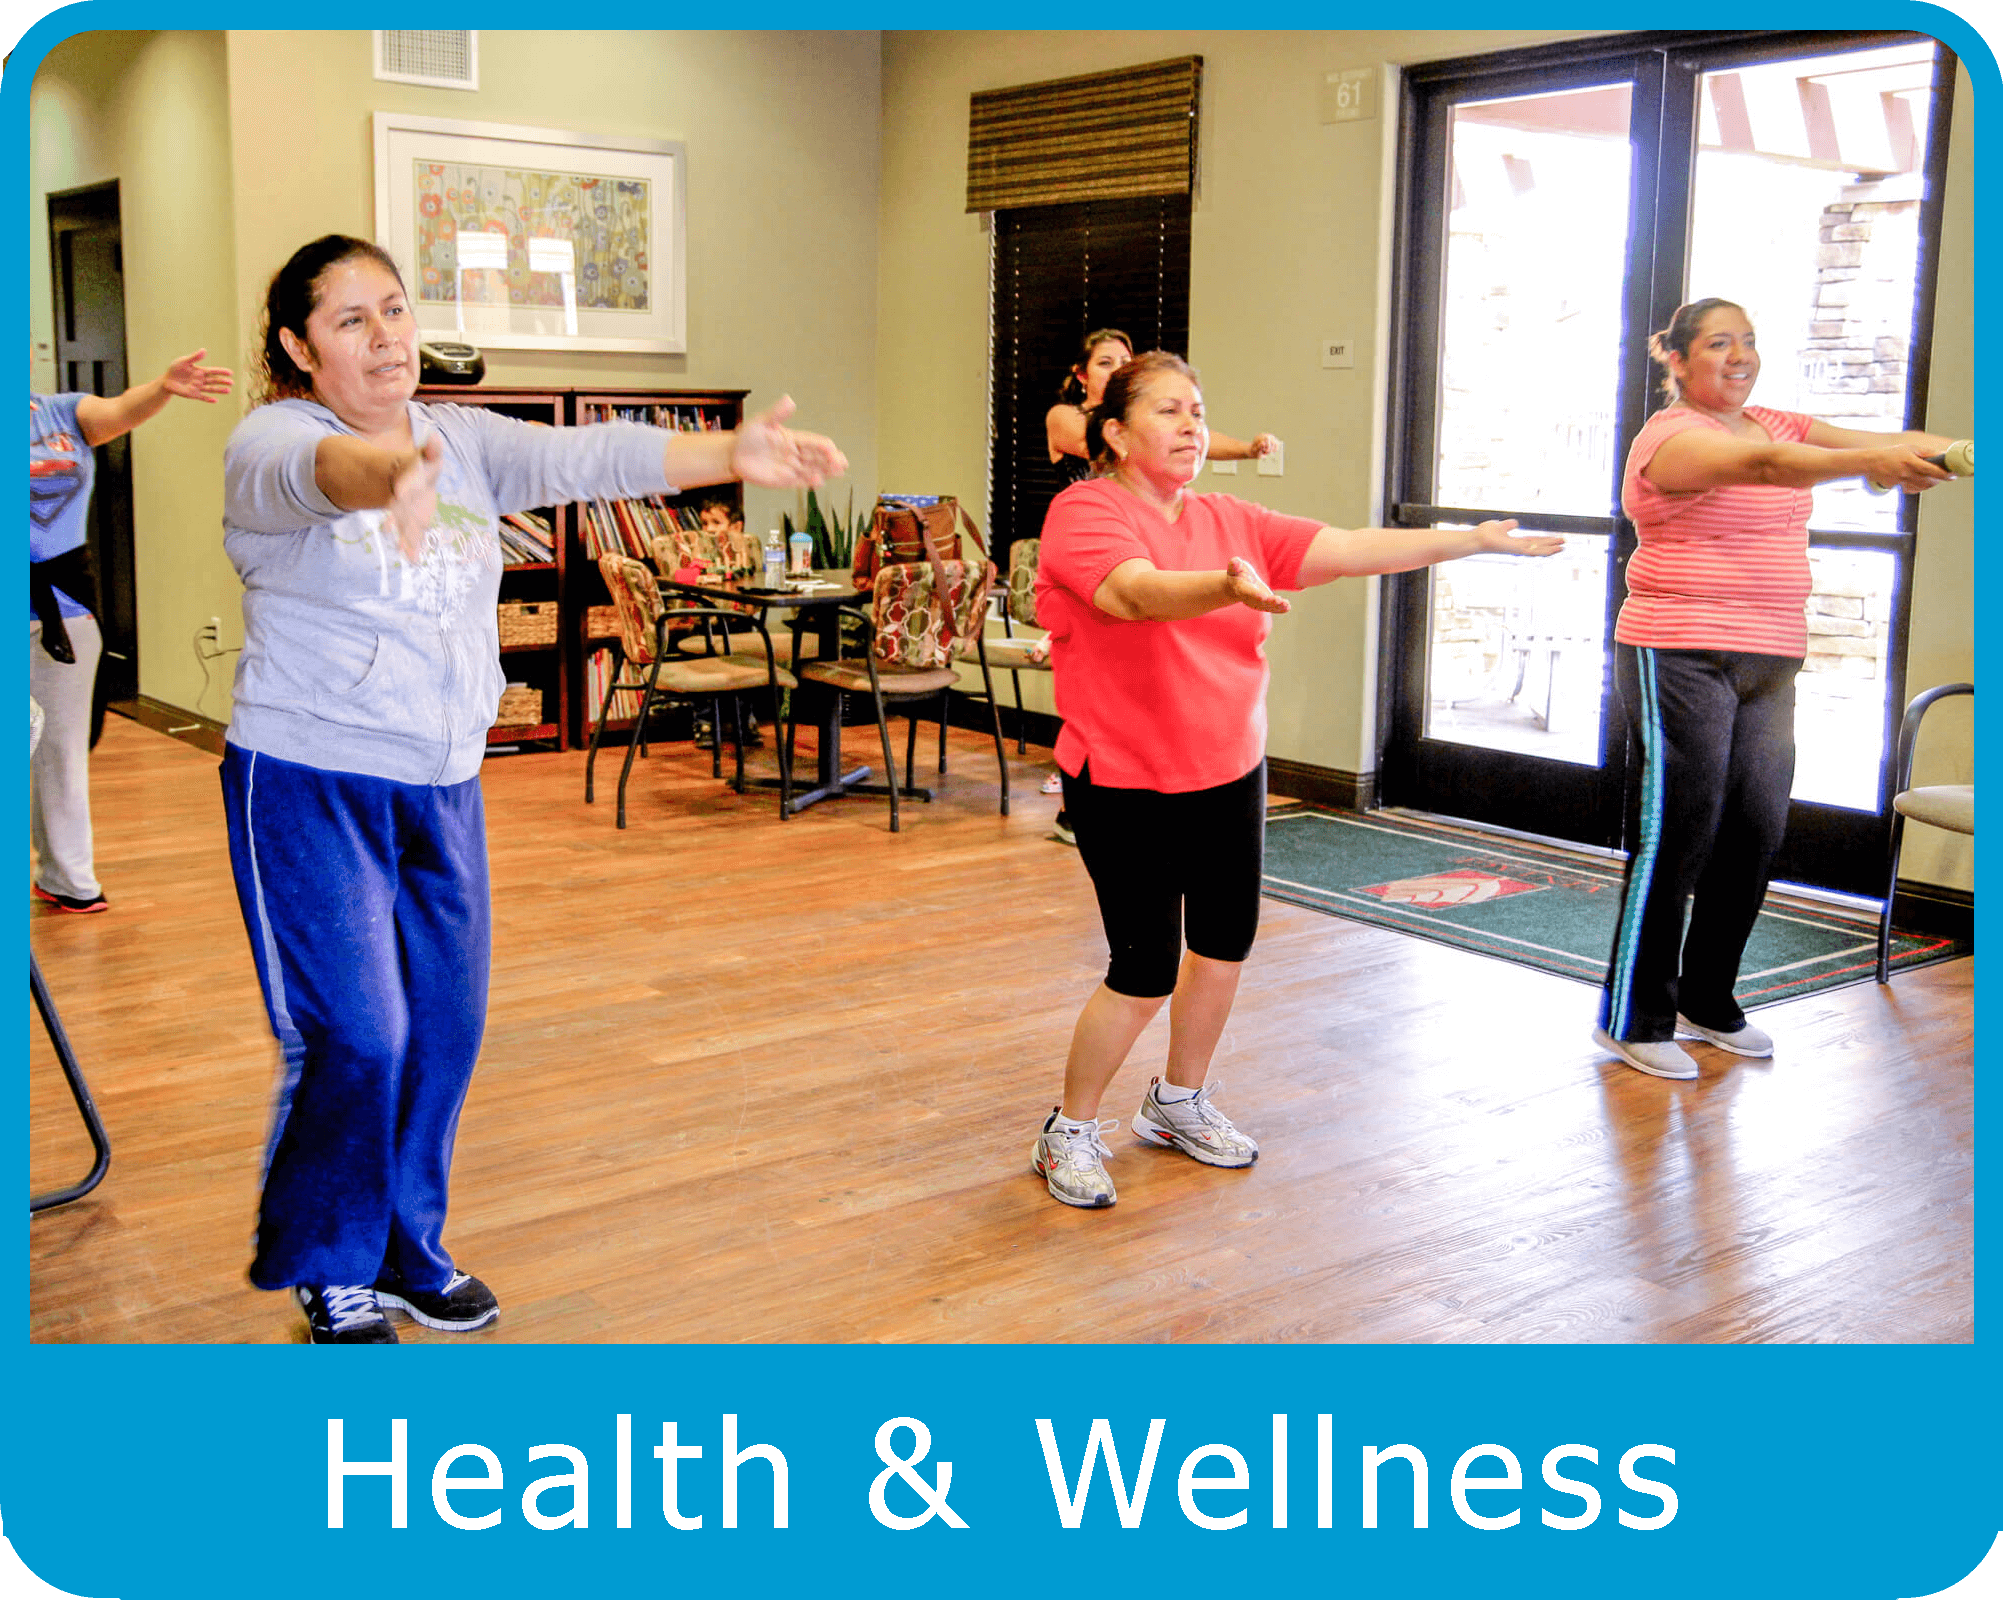 5 women doing exercise together in a Project Access fitness class. Health and wellness